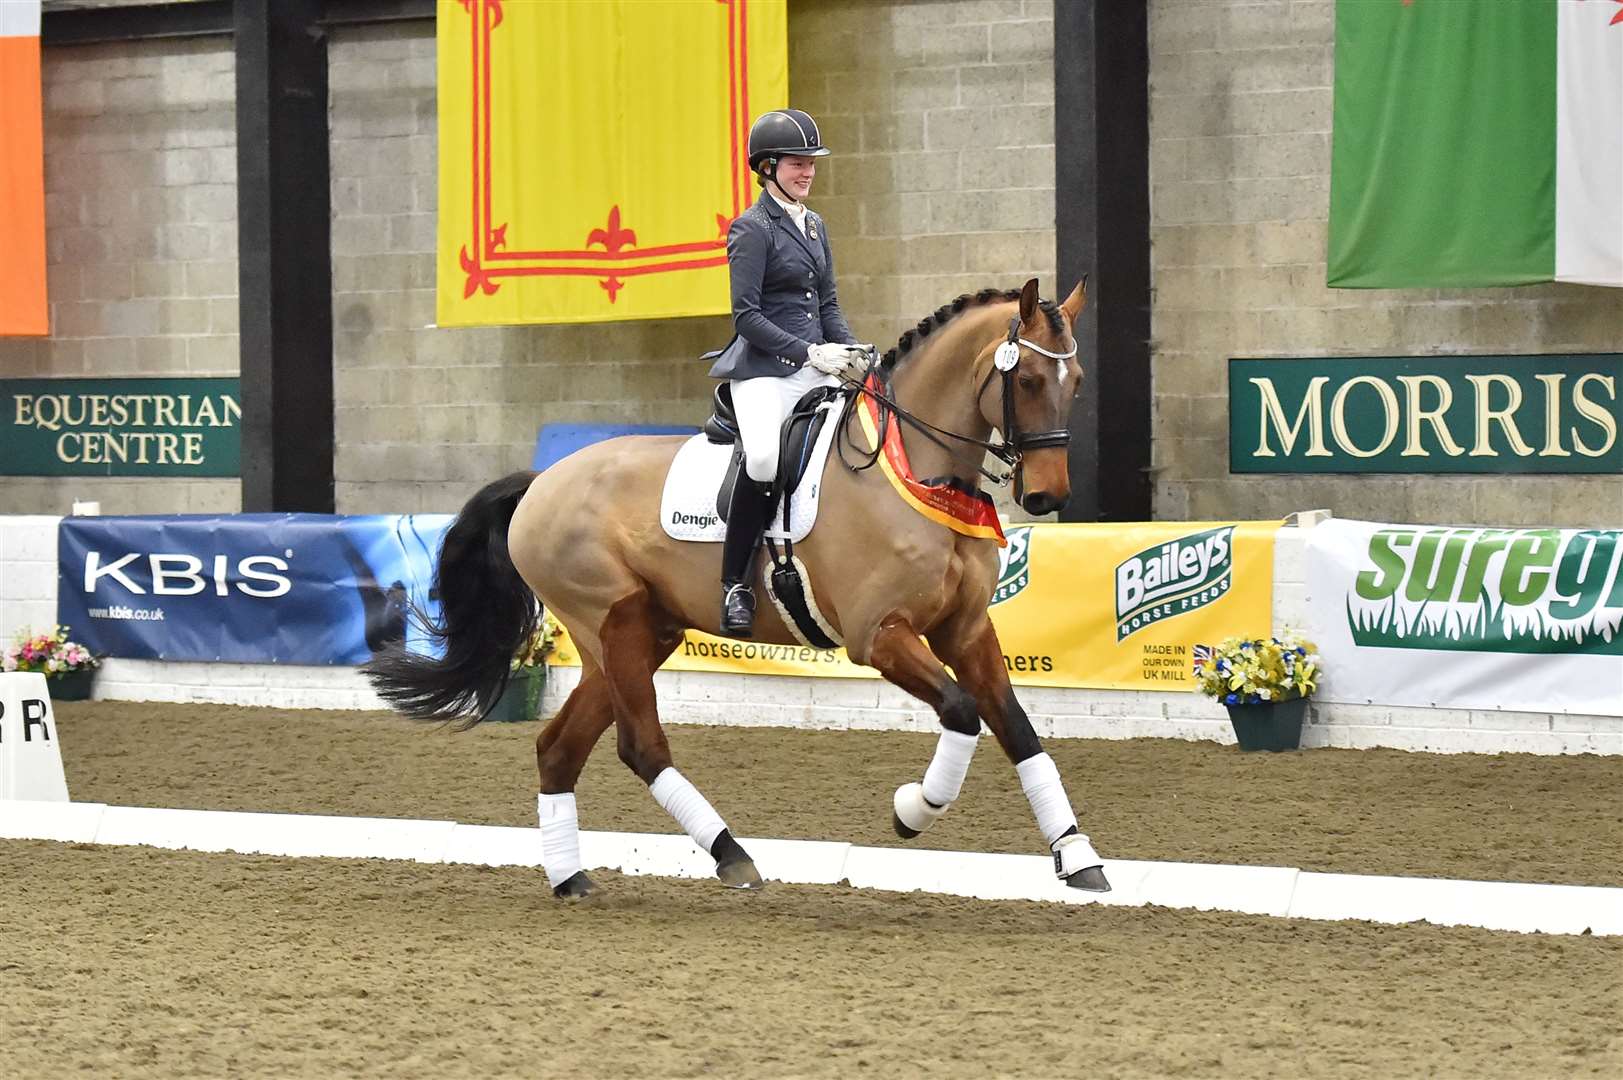 Young riders performed well in the dressage day.